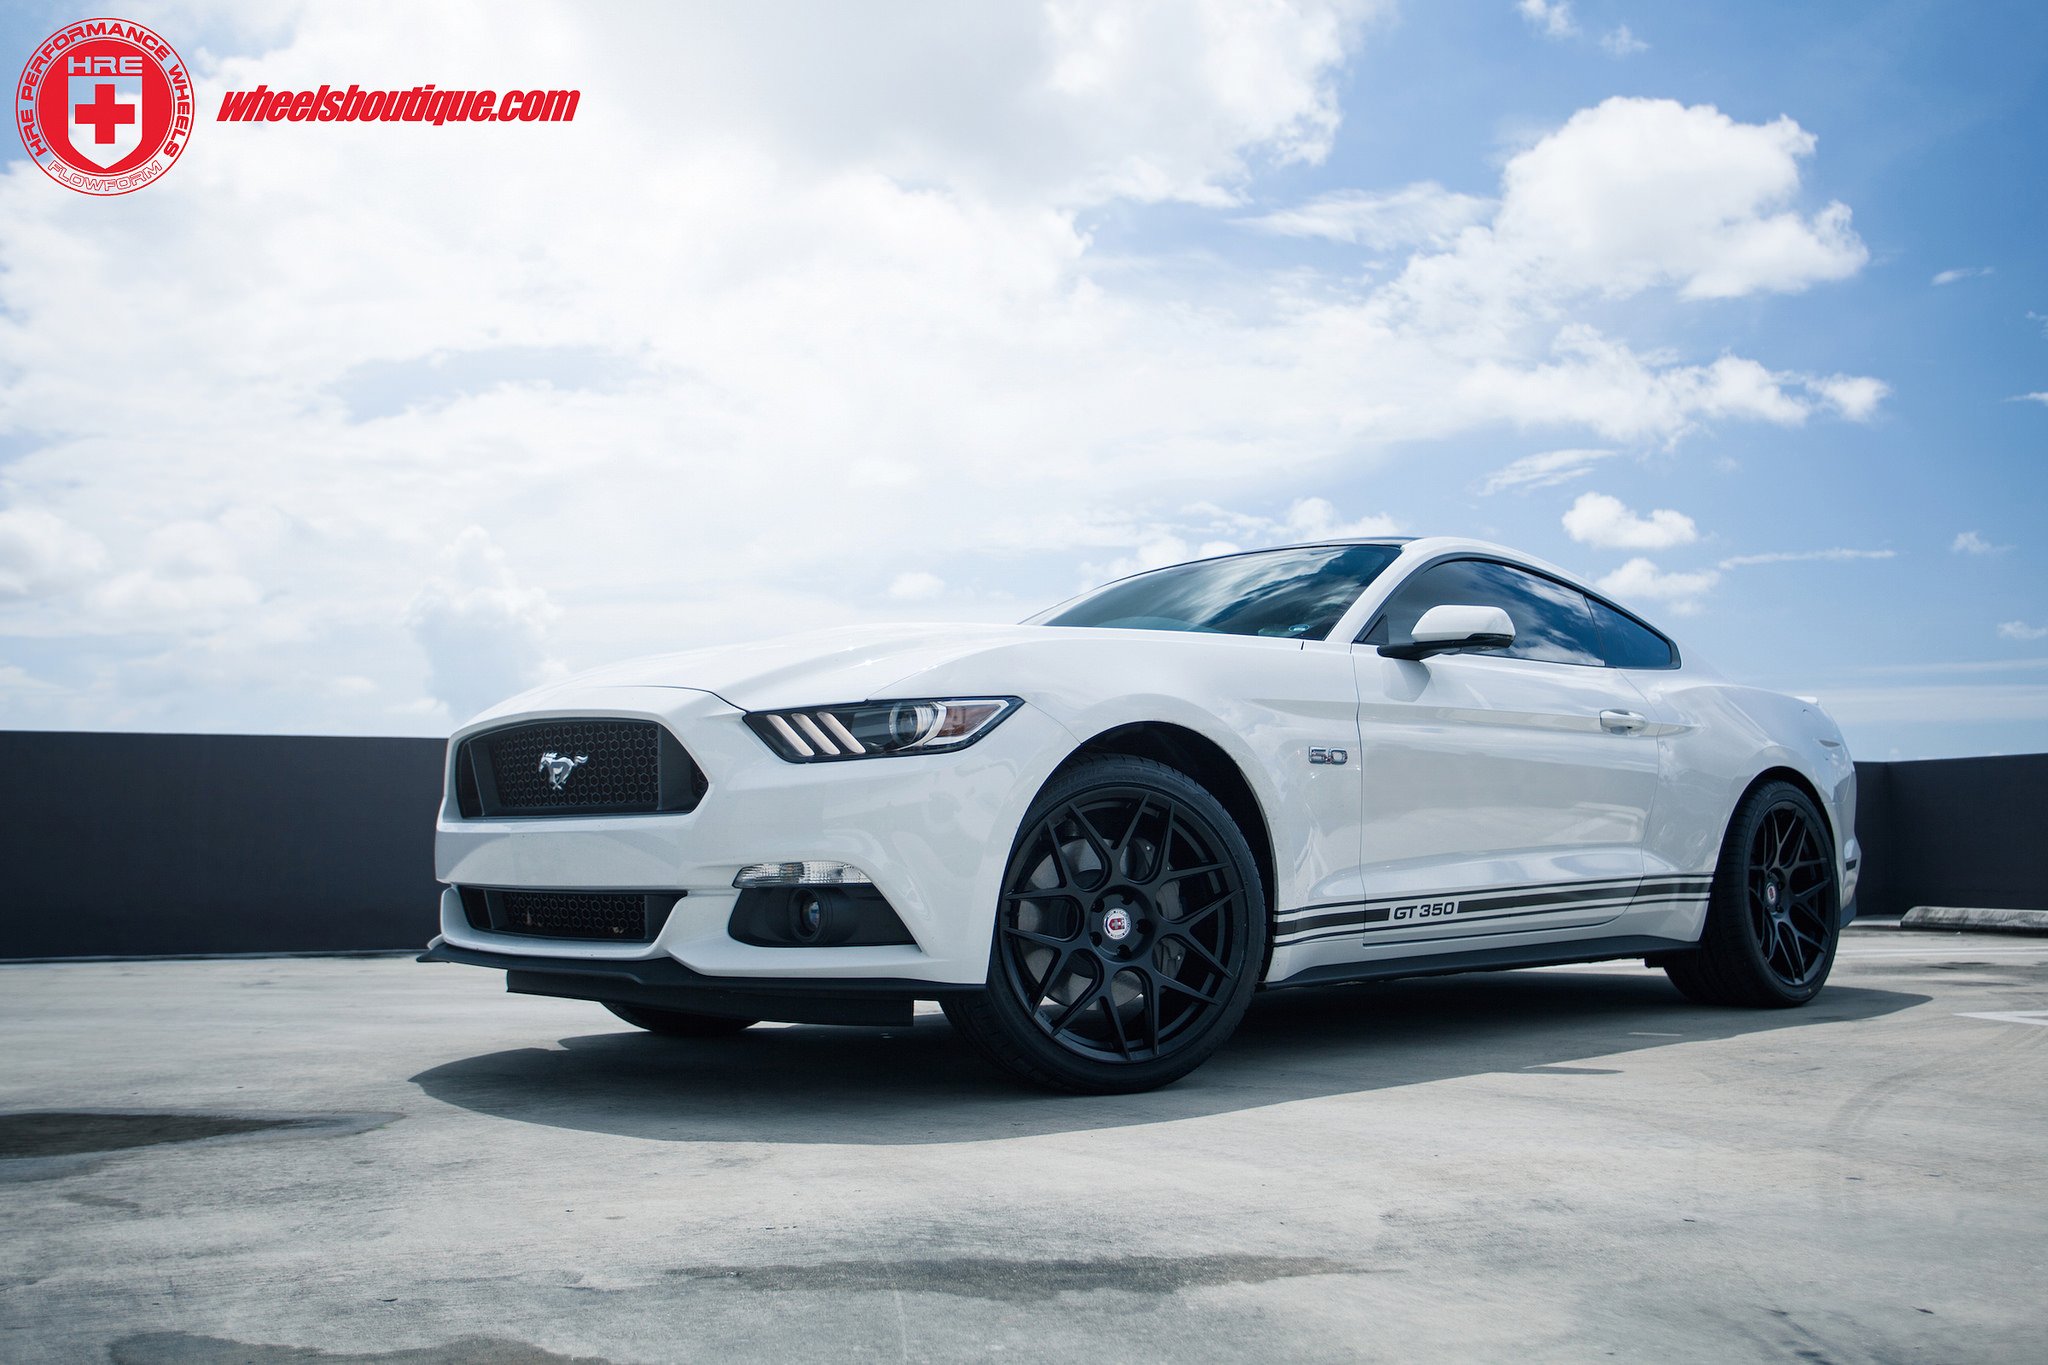 ford, Mustang gt, Hre, Wheels, Coupe, Cars Wallpaper